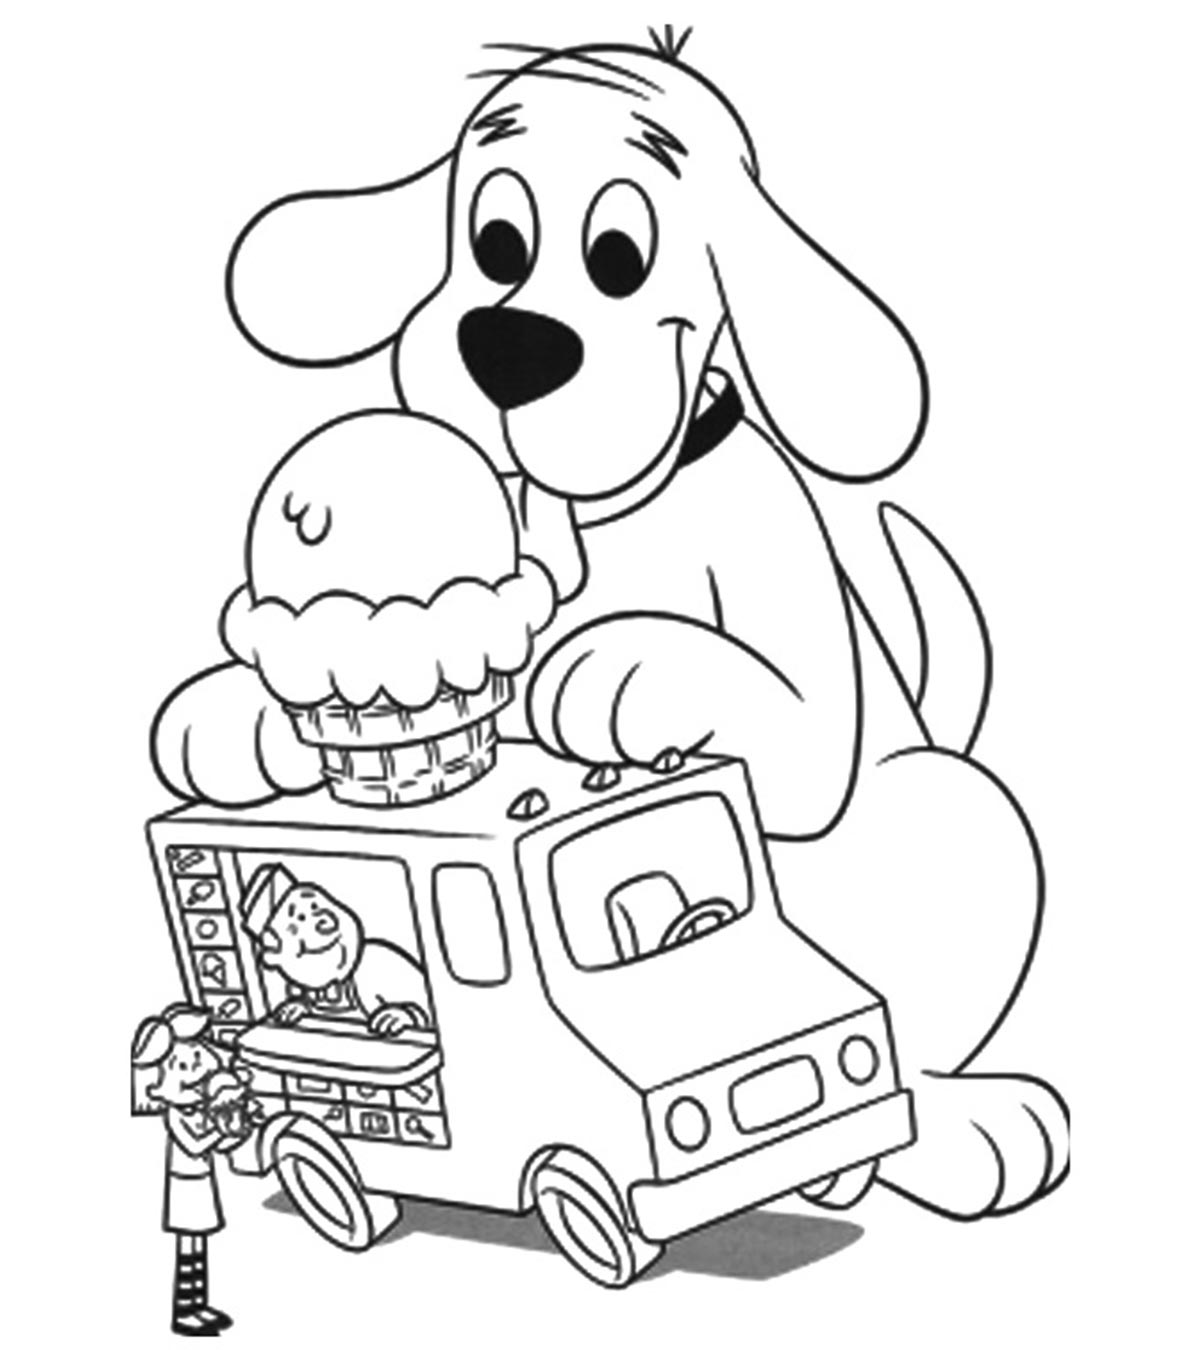 Download Snacks Coloring Pages - MomJunction